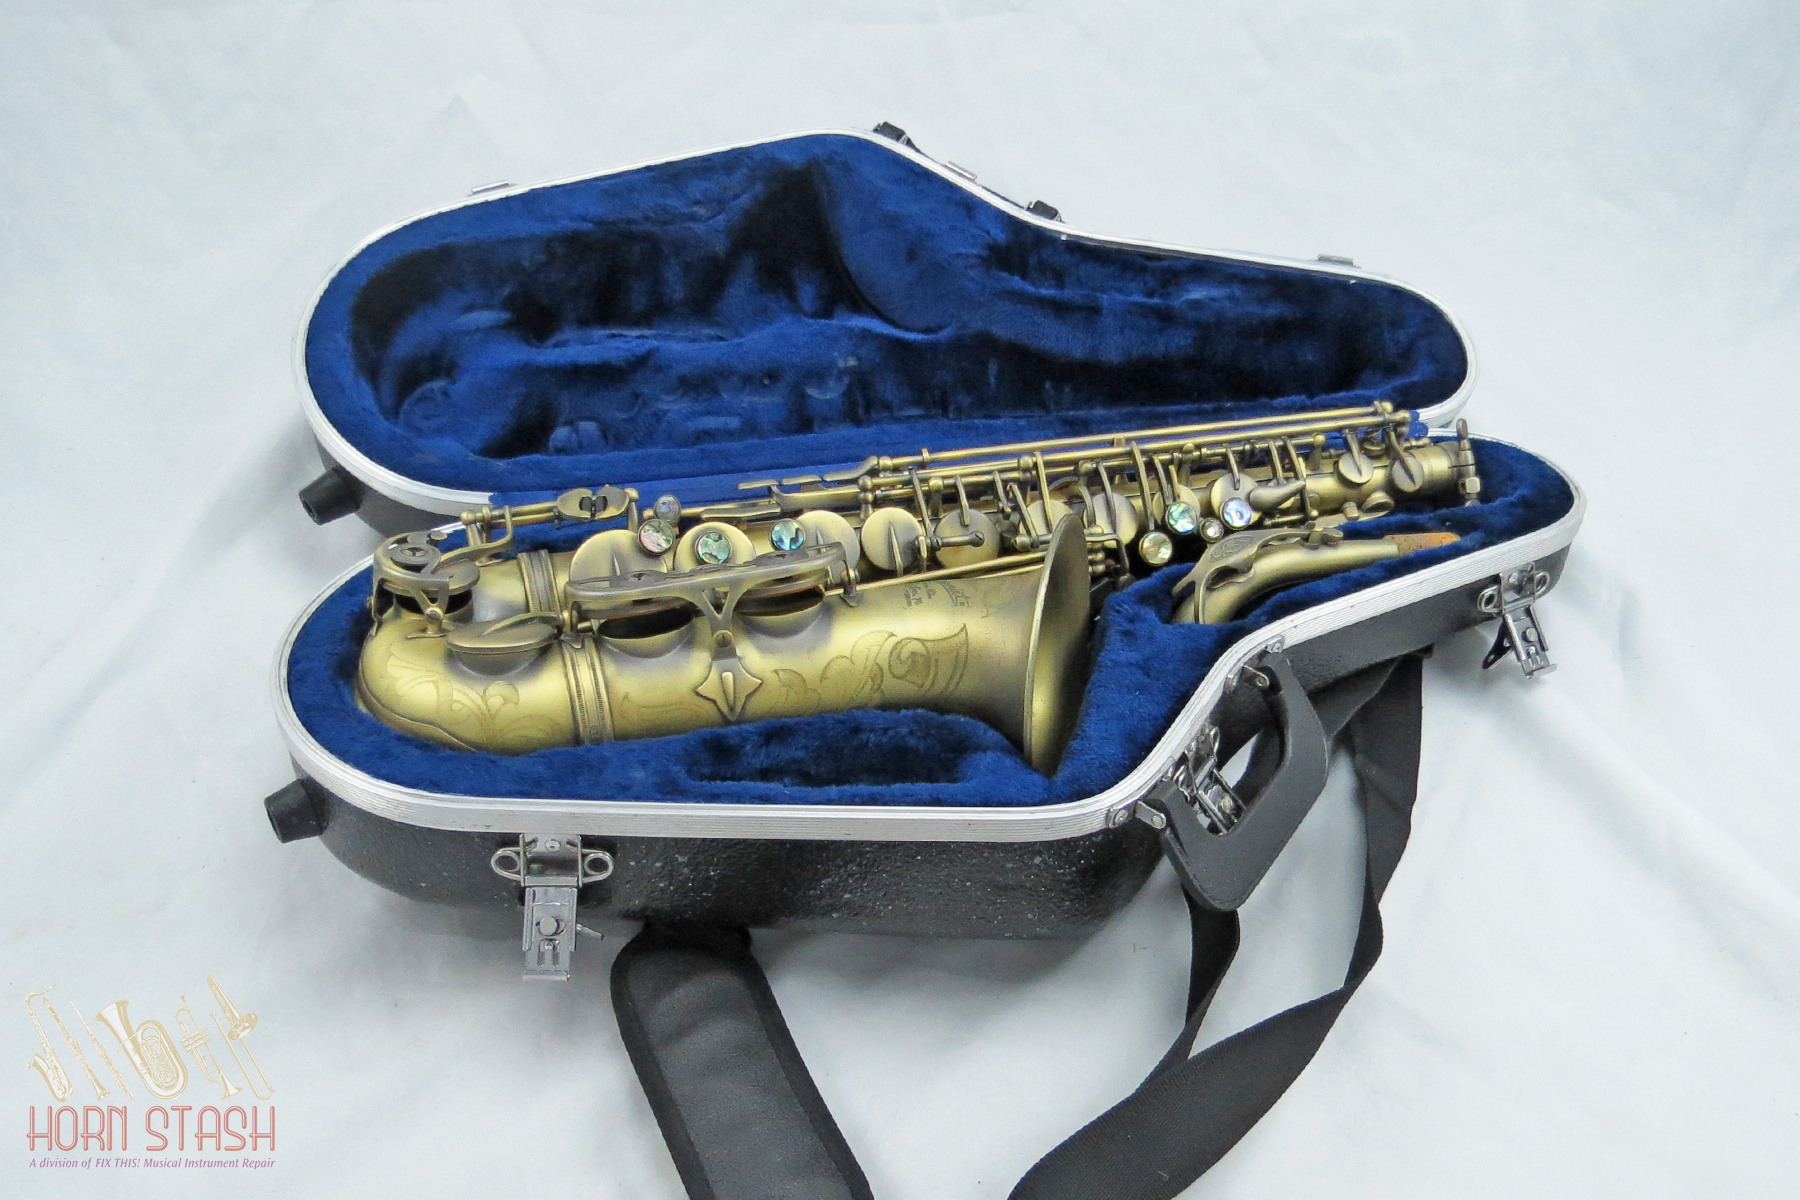 P. Mauriat Used P. Mauriat System 76 Alto Saxophone (2nd Edition) - PM10295XX